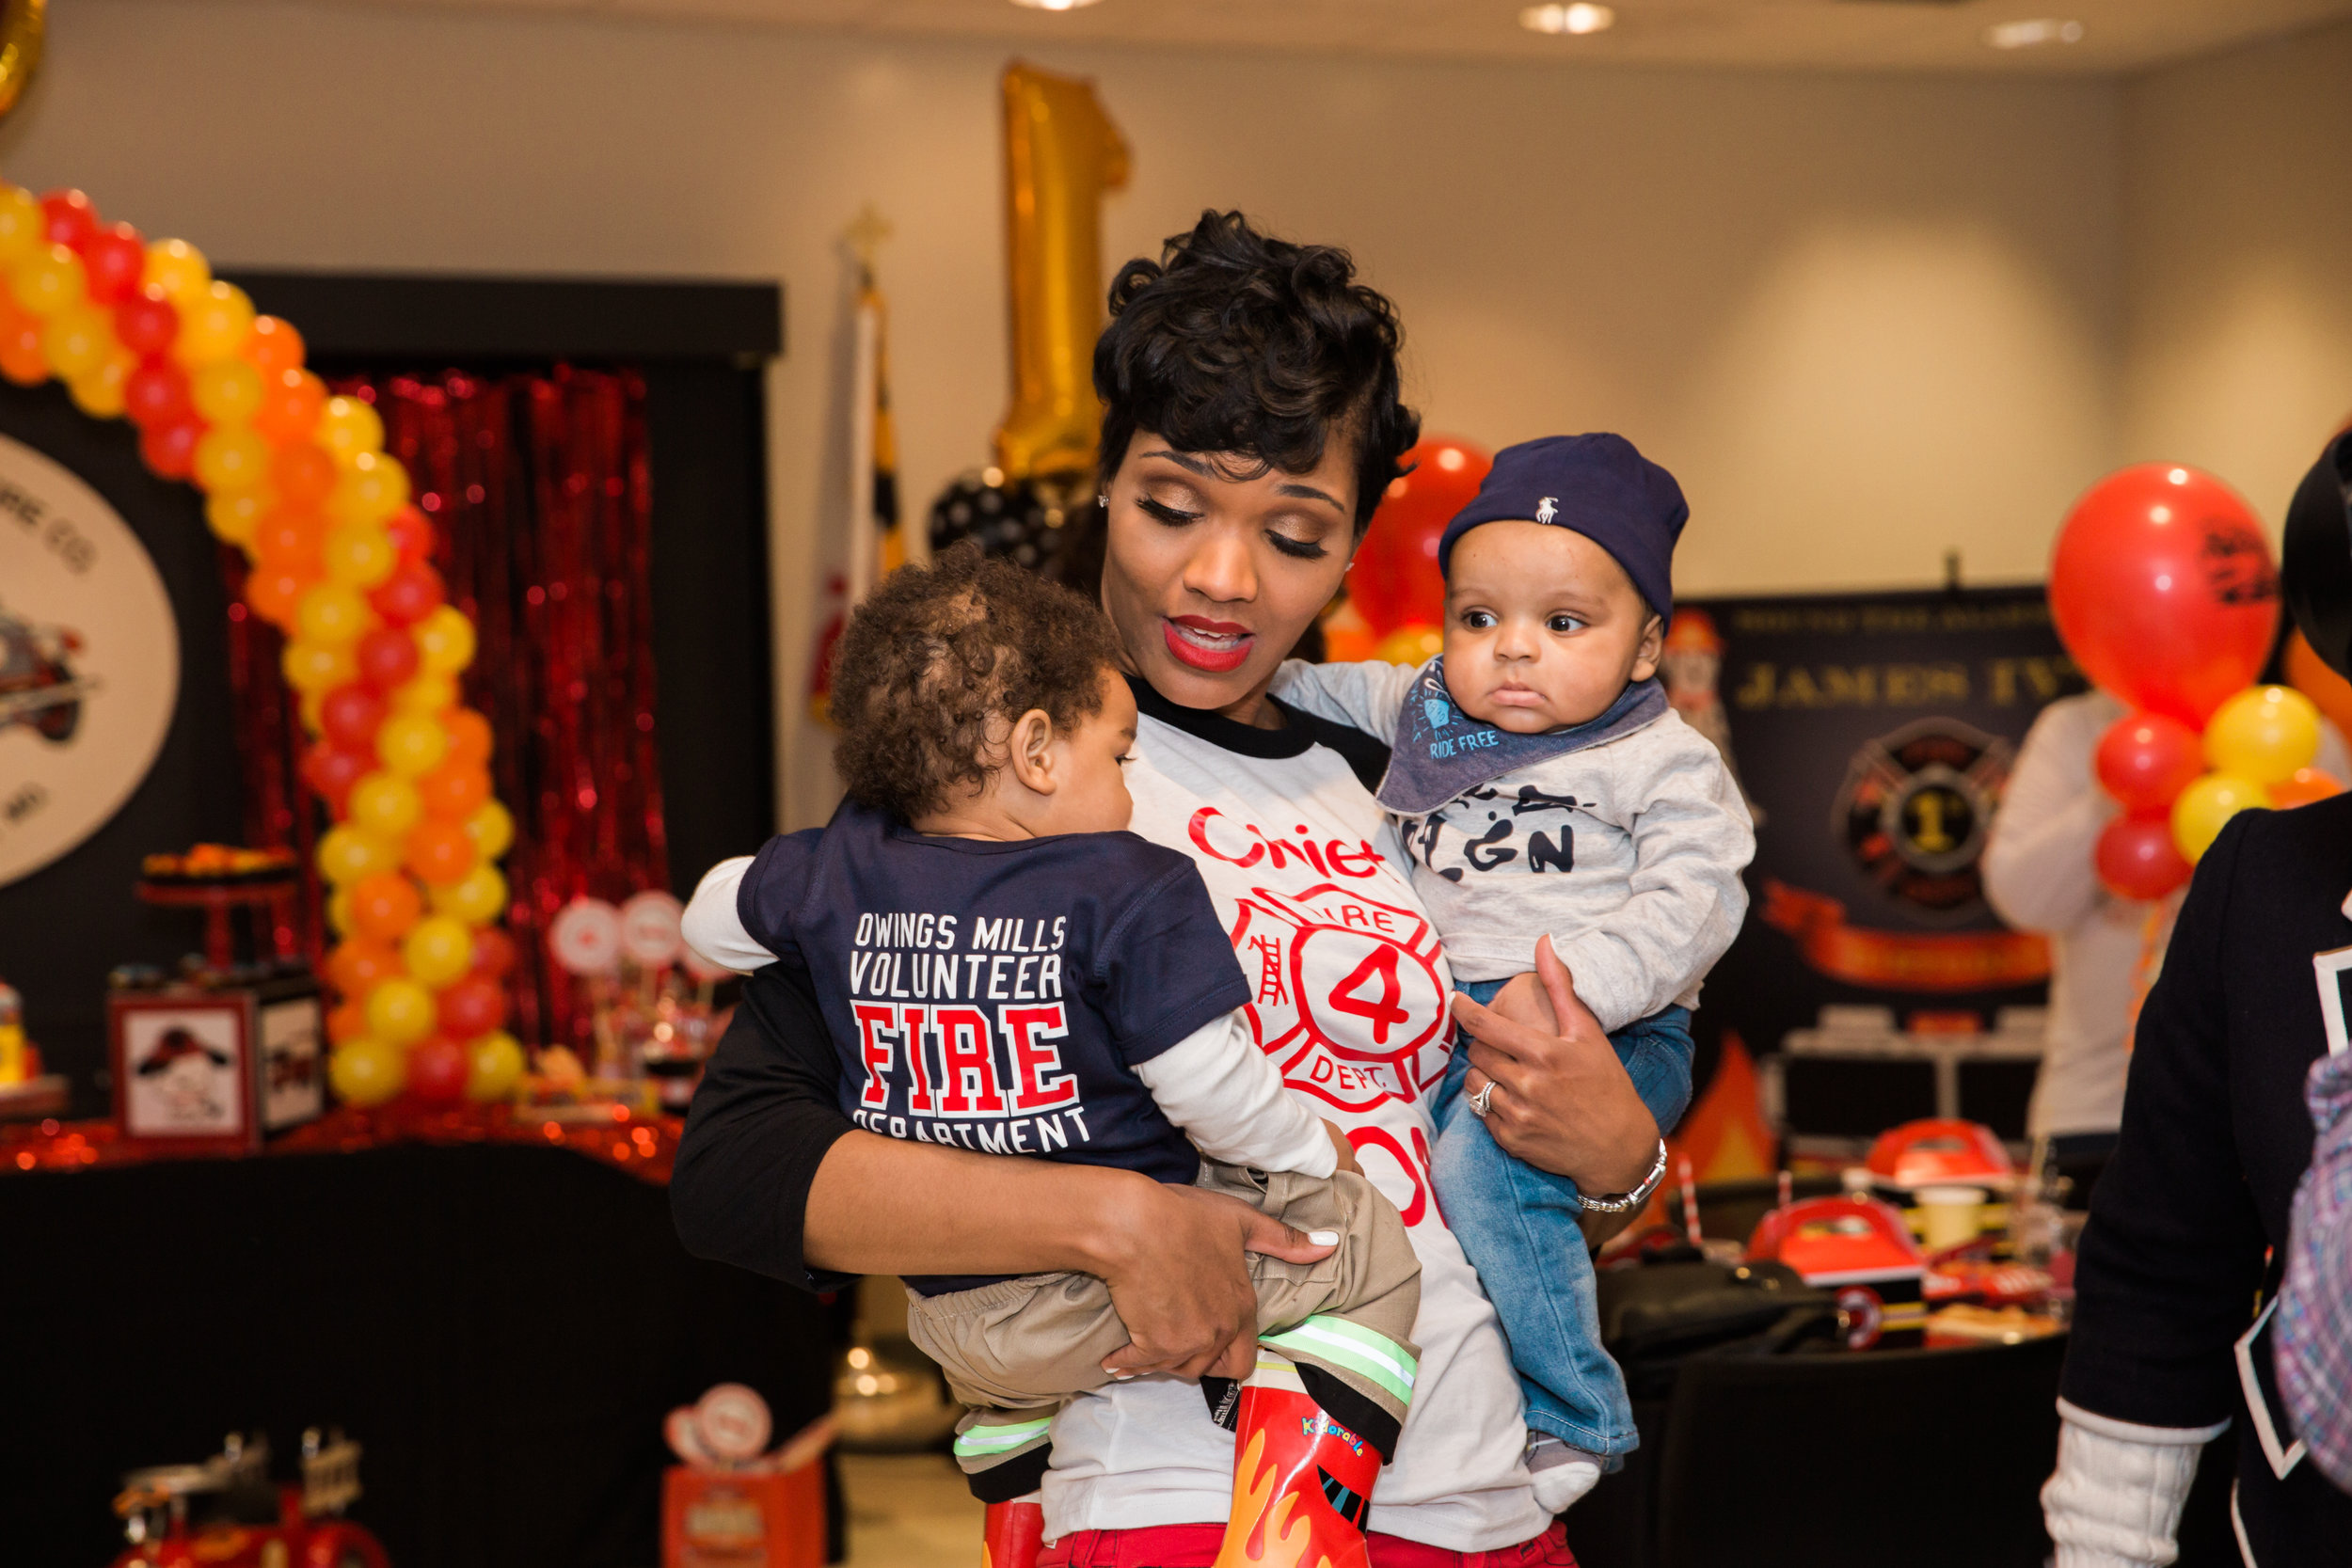 Fireman Birthday Party Ideas  Decorations Owings Mills Fire Department Maryland Family Photographers Megapixels Media Photography (44 of 55).jpg